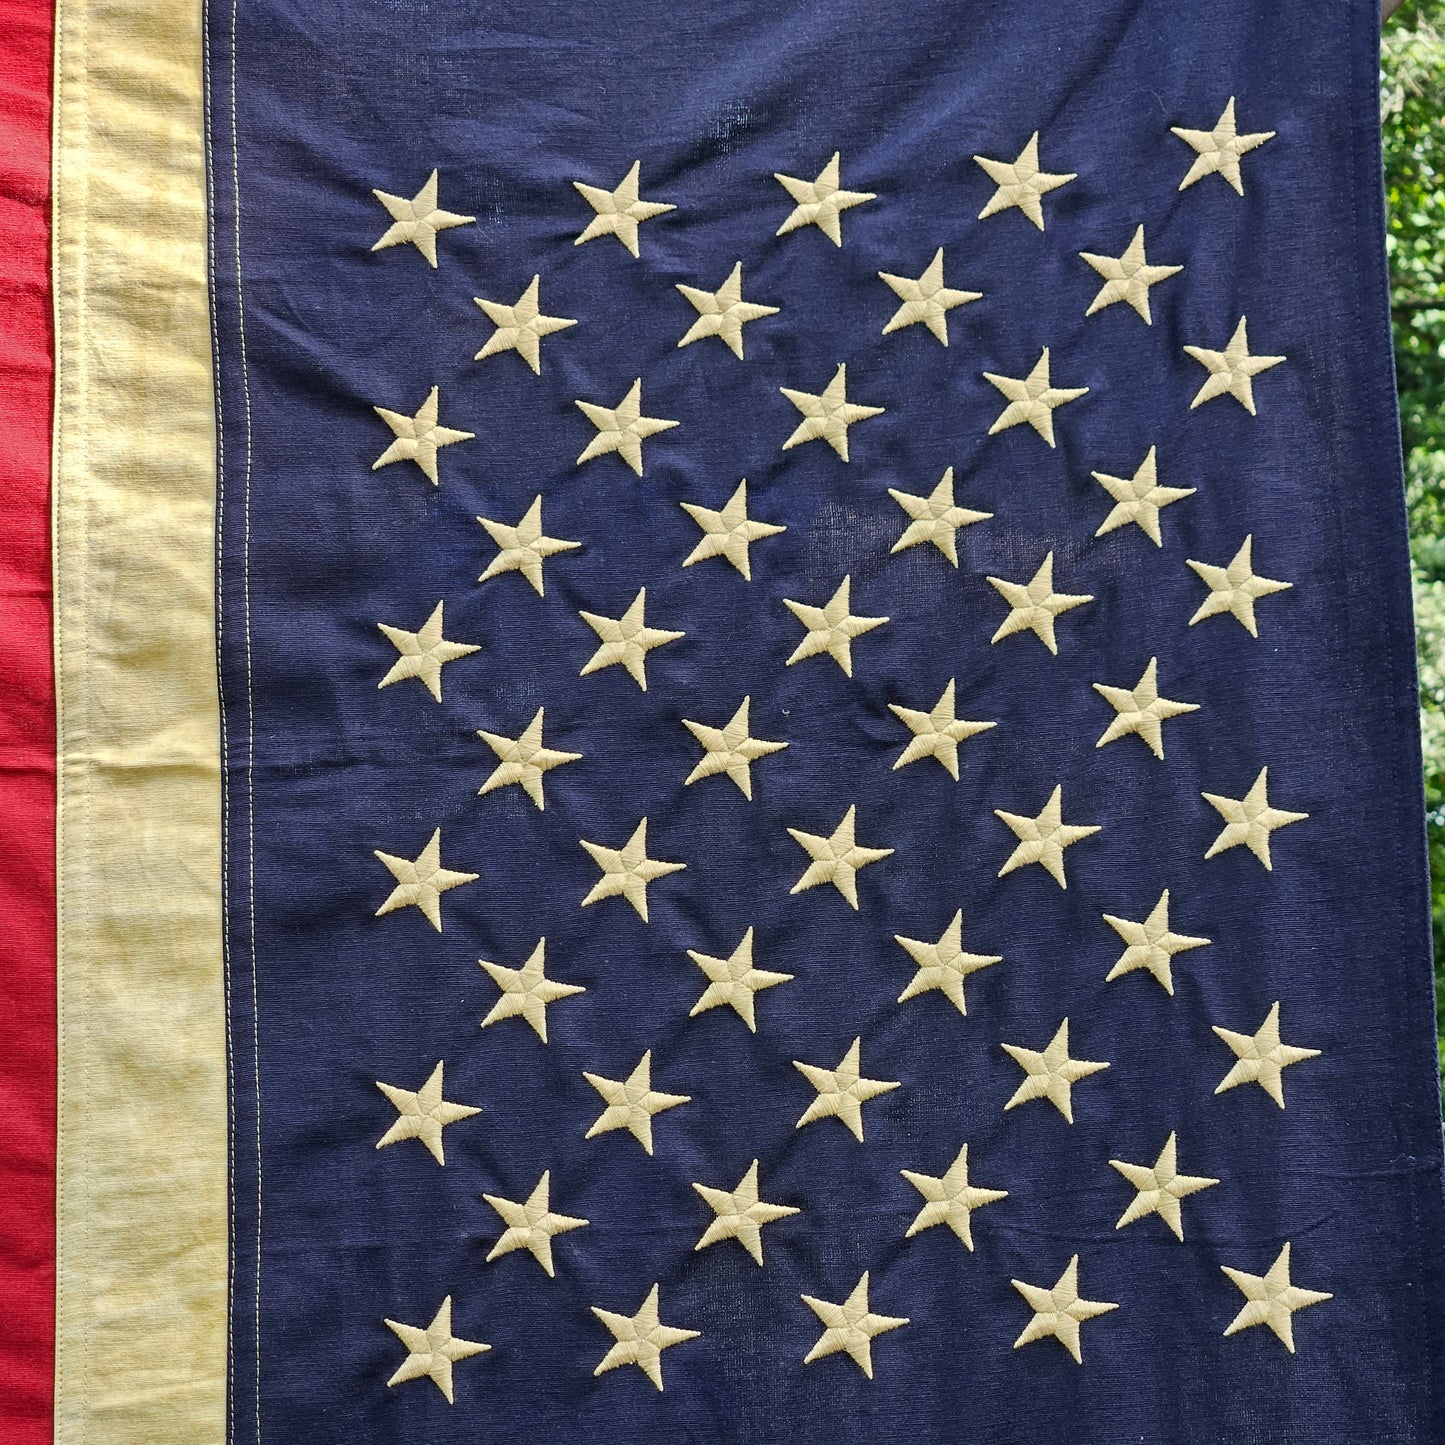 Large 50 Tea-Stained Star American Flag 32" x 58"